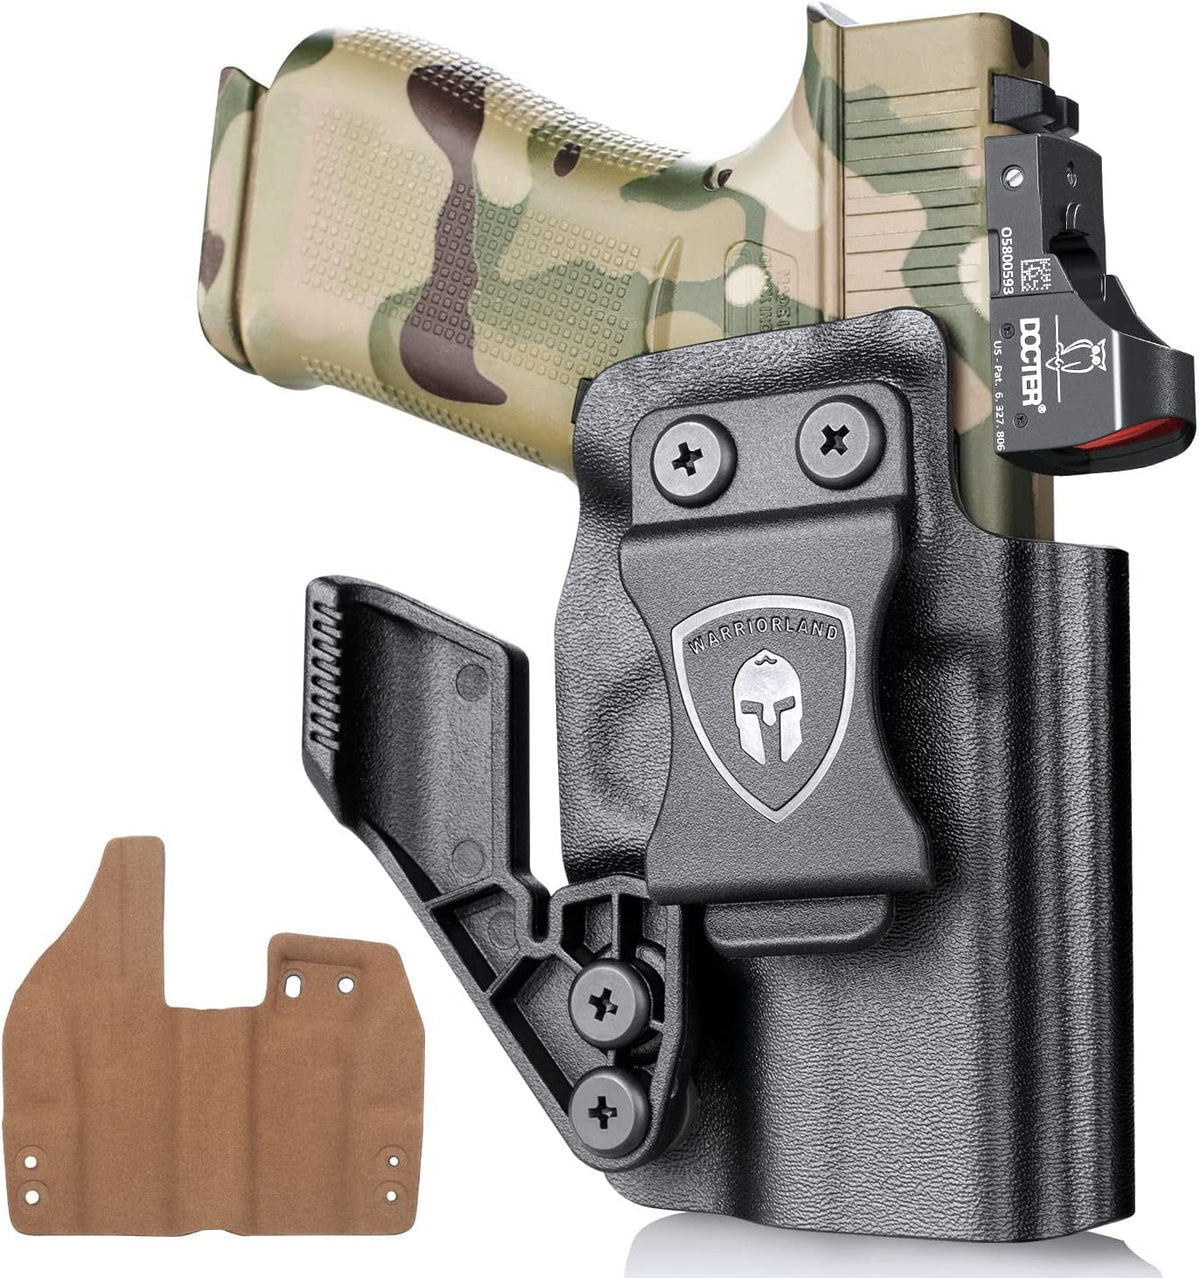 Glock 43 /43x Soft Lined Kydex Leather Inside Hybrid IWB with red dot sight optic cut and claw for fat guys